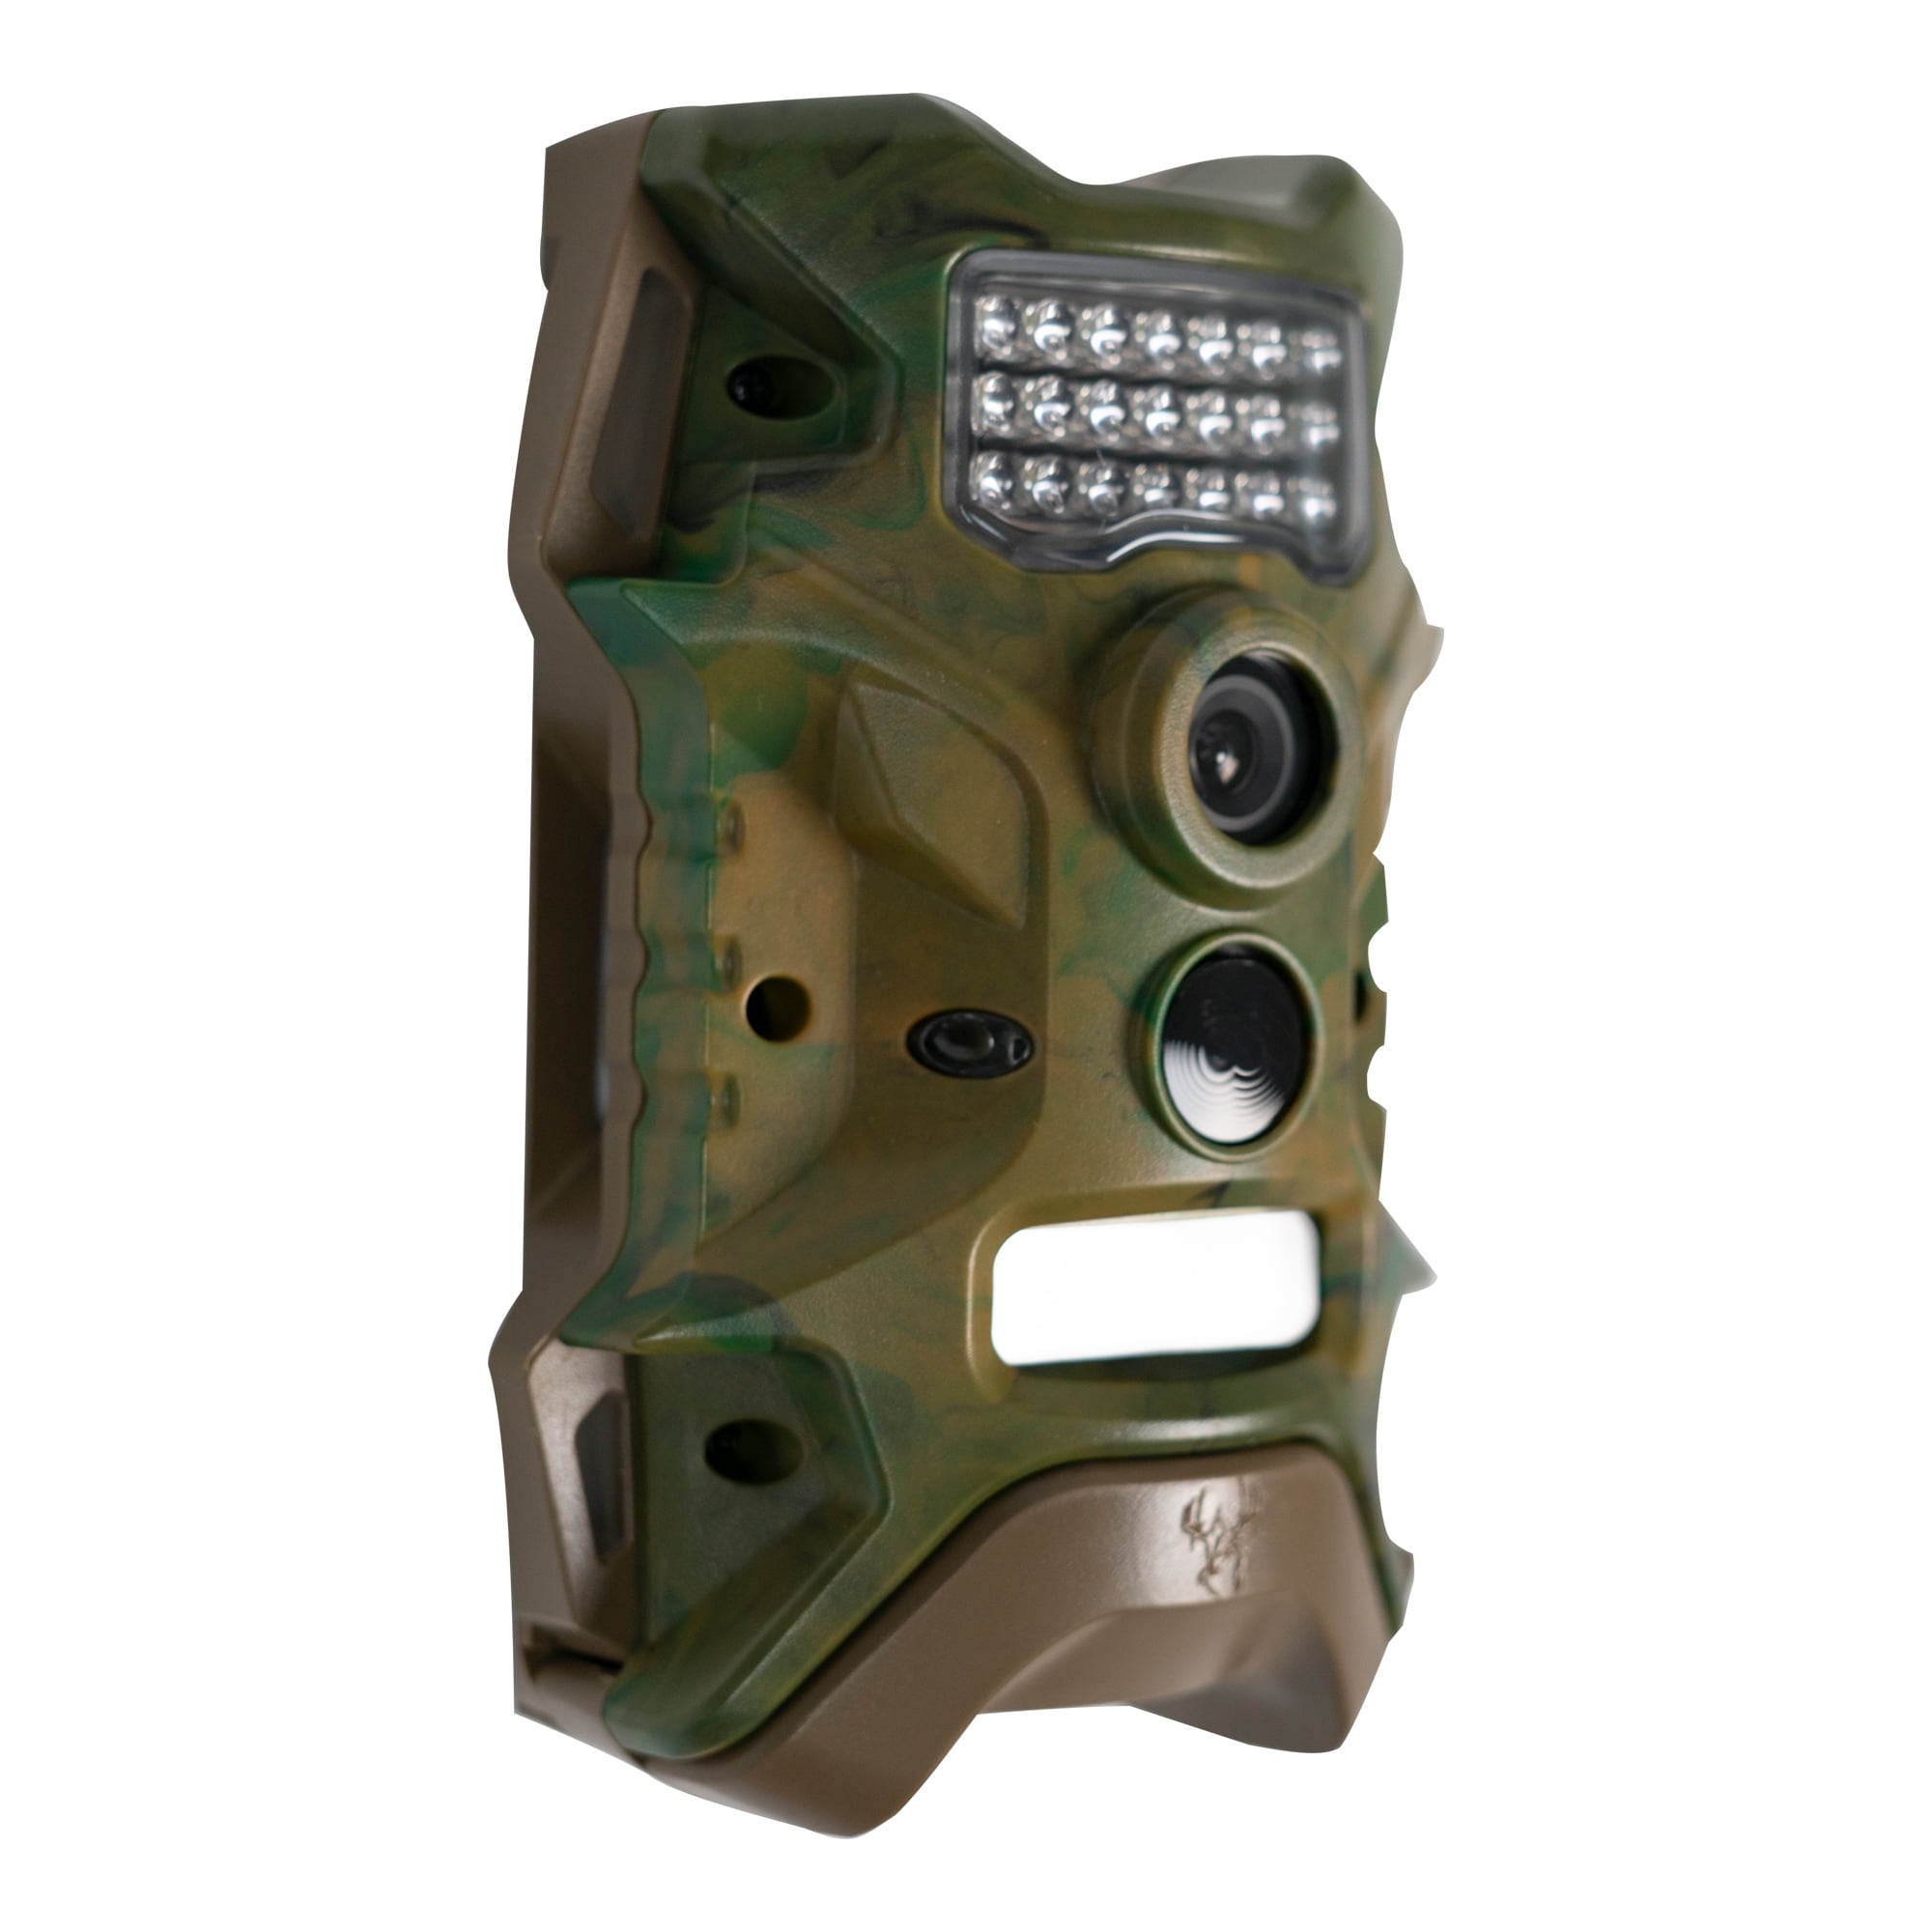 12 MP HD LED Infrared Scouting Wild Game Camera 60 ft Range Rapid Trigger Speed 